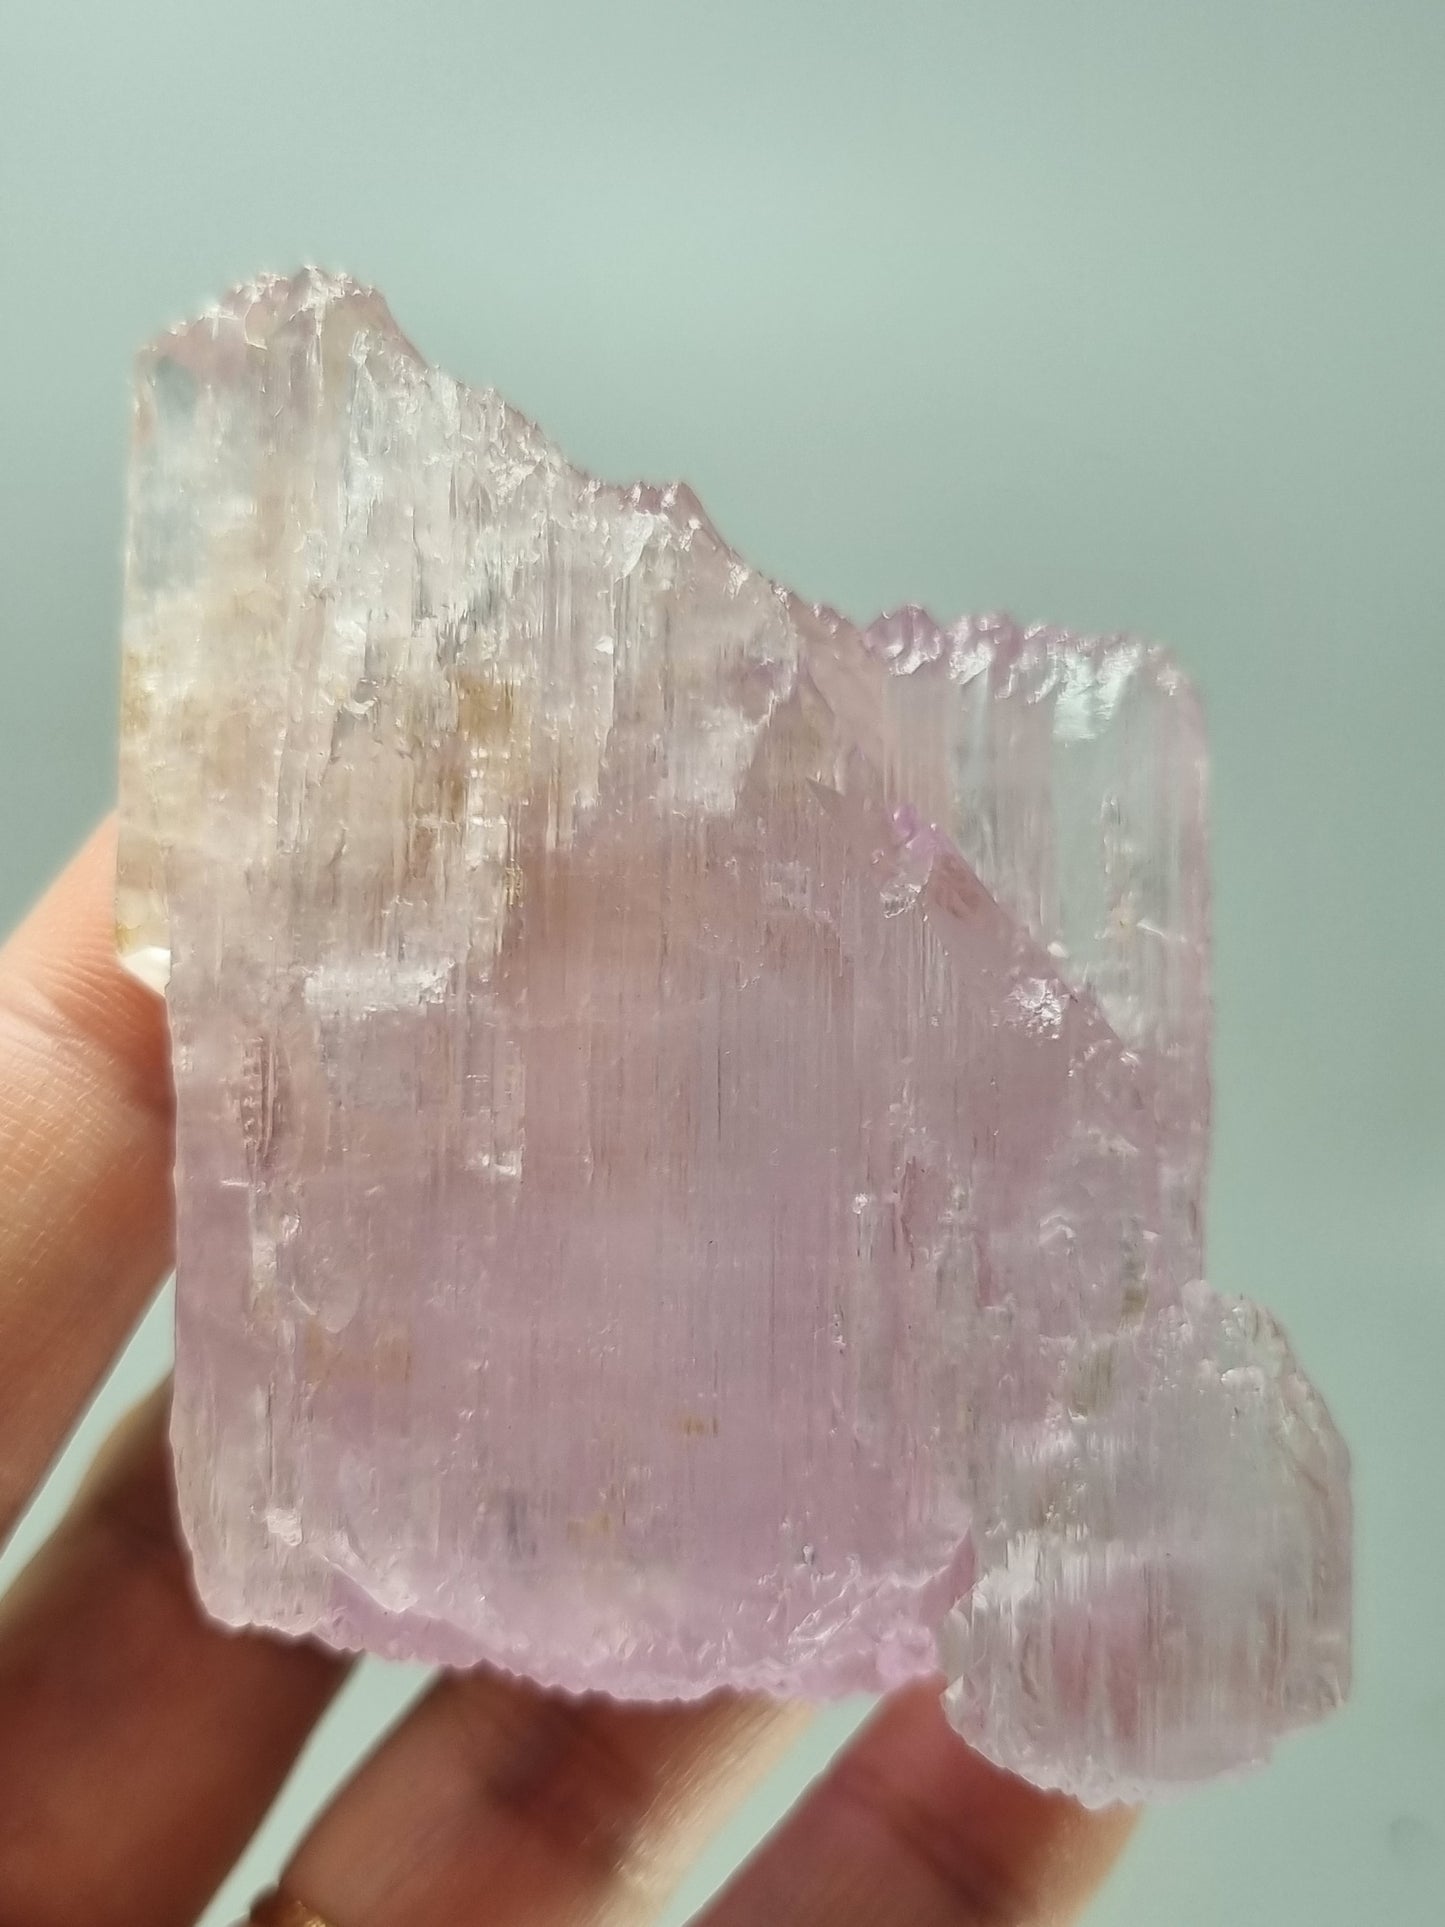 Large Terminated Natural Pink Kunzite Mineral Specimen with rider crystal